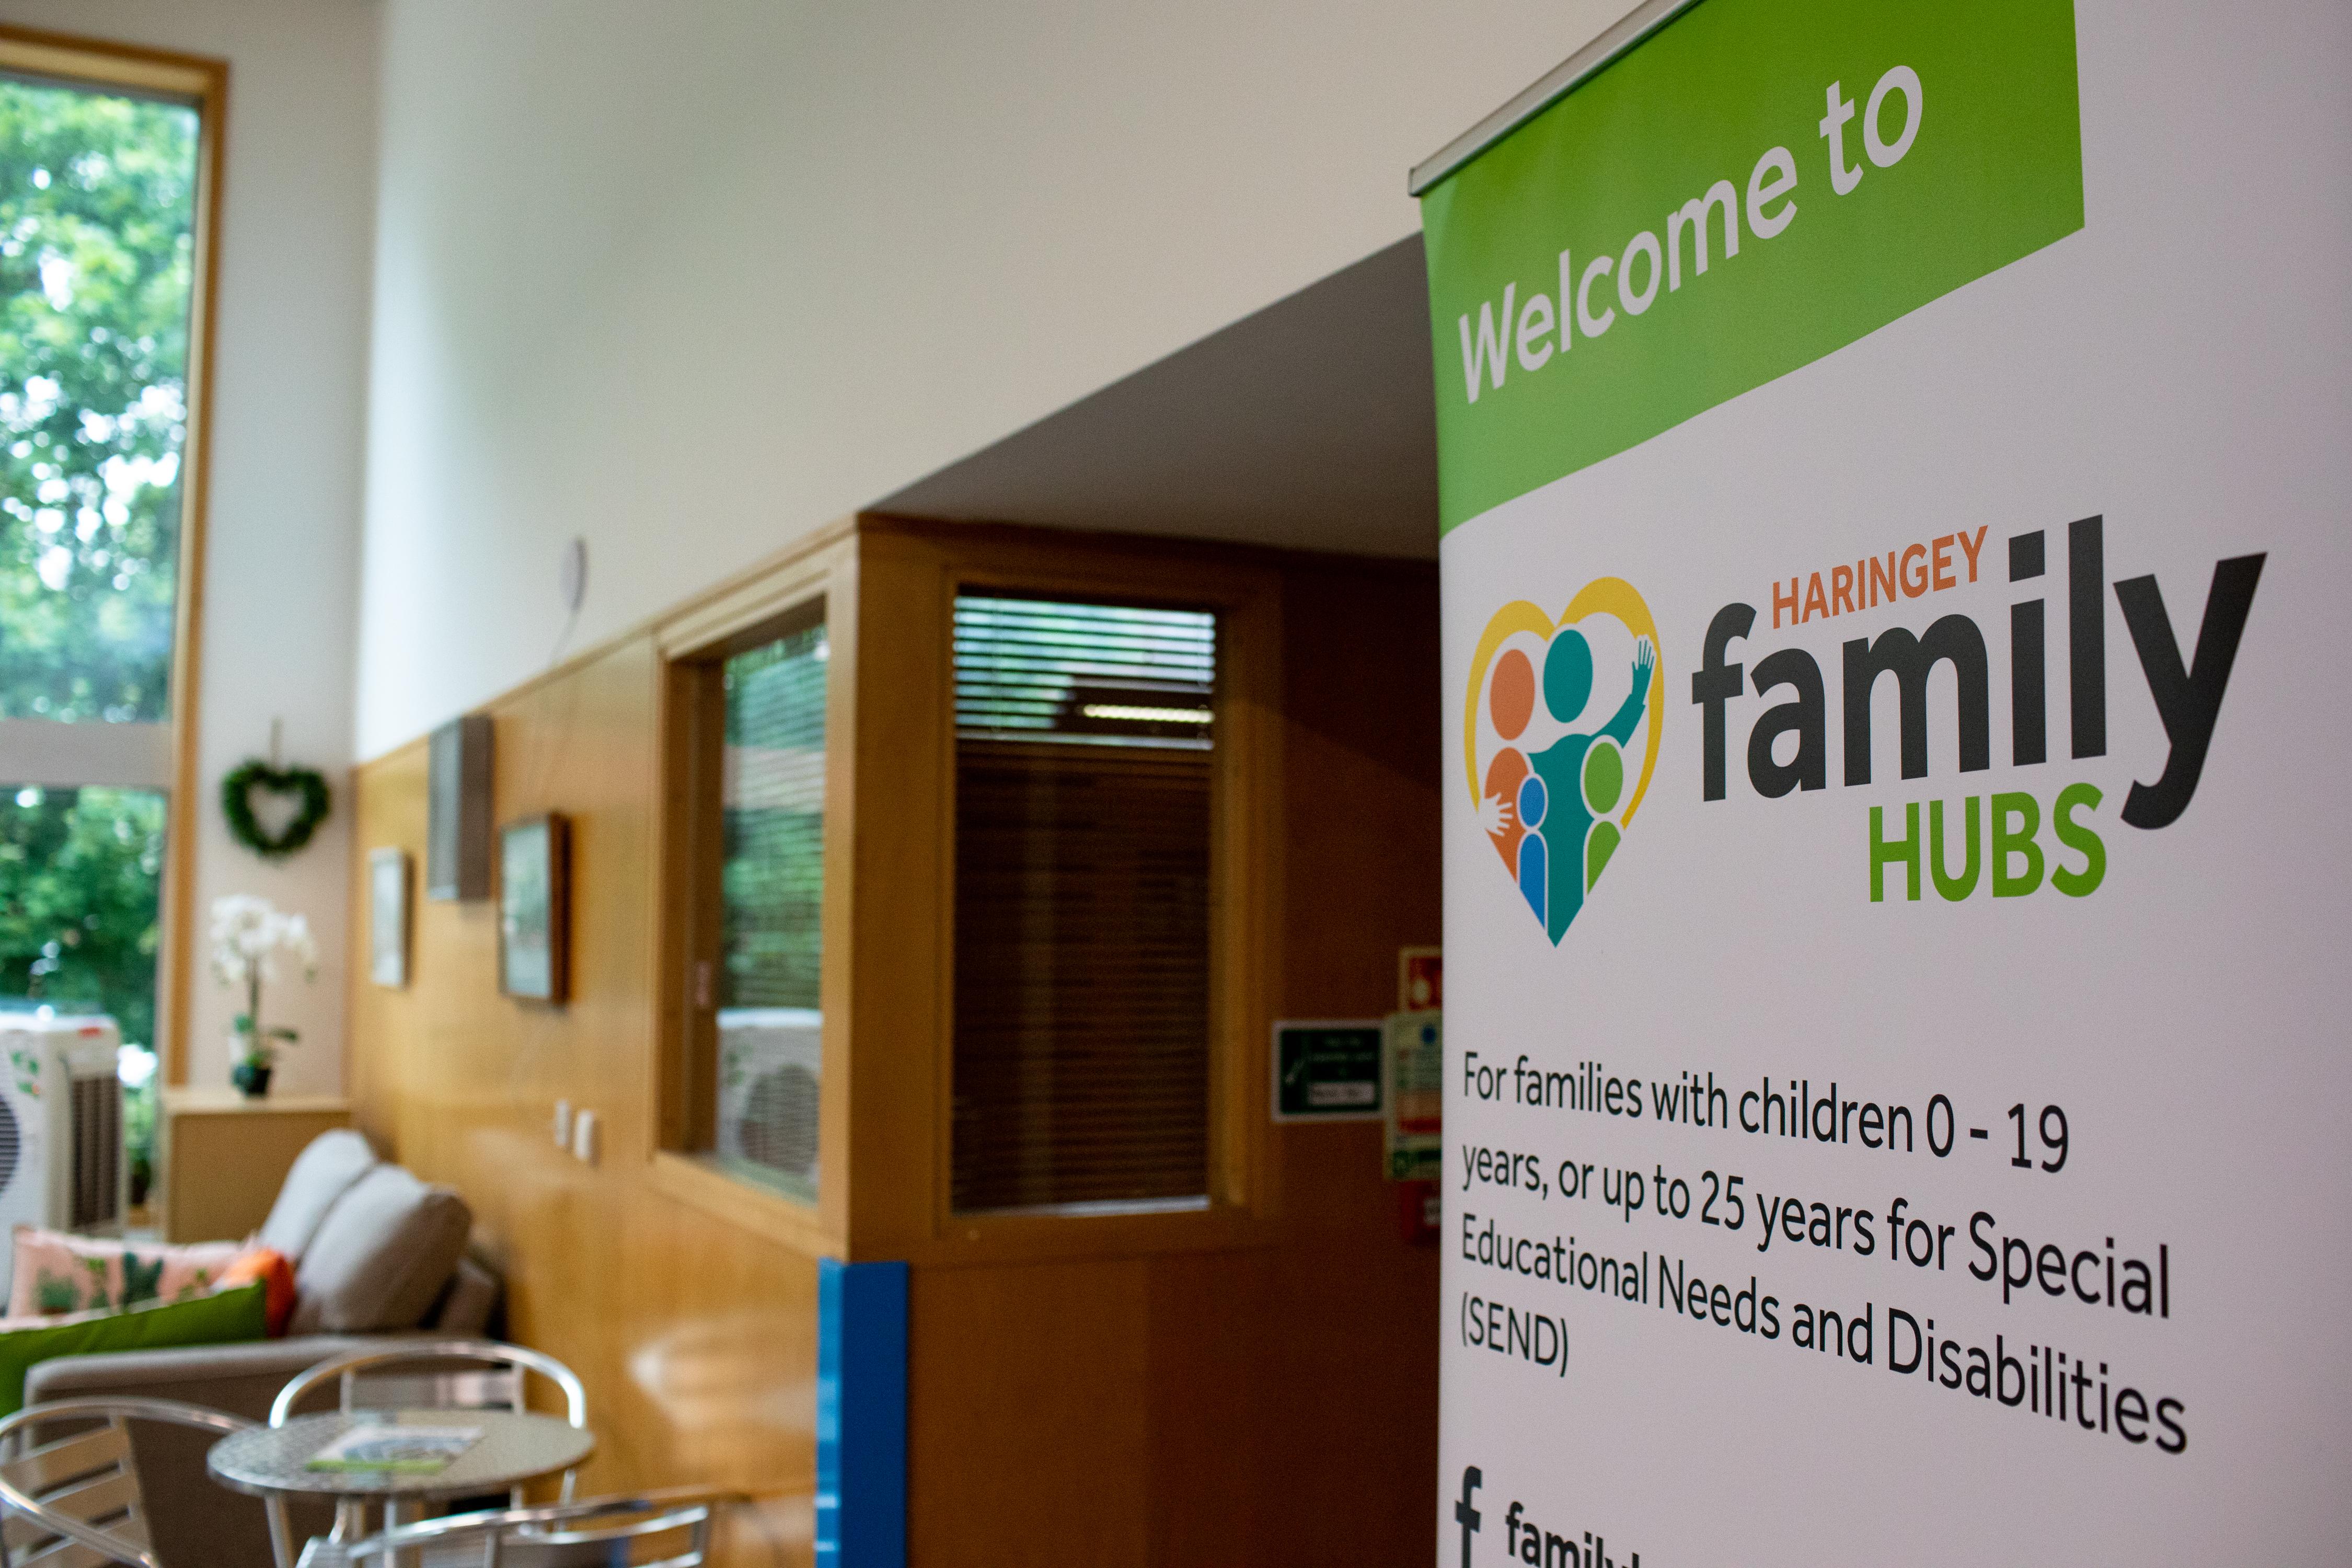 The pic is of Haringey's first-ever family hub at the Triangle Centre, 91 – 93 St Ann’s Road, N15 6NU during its official launch event.